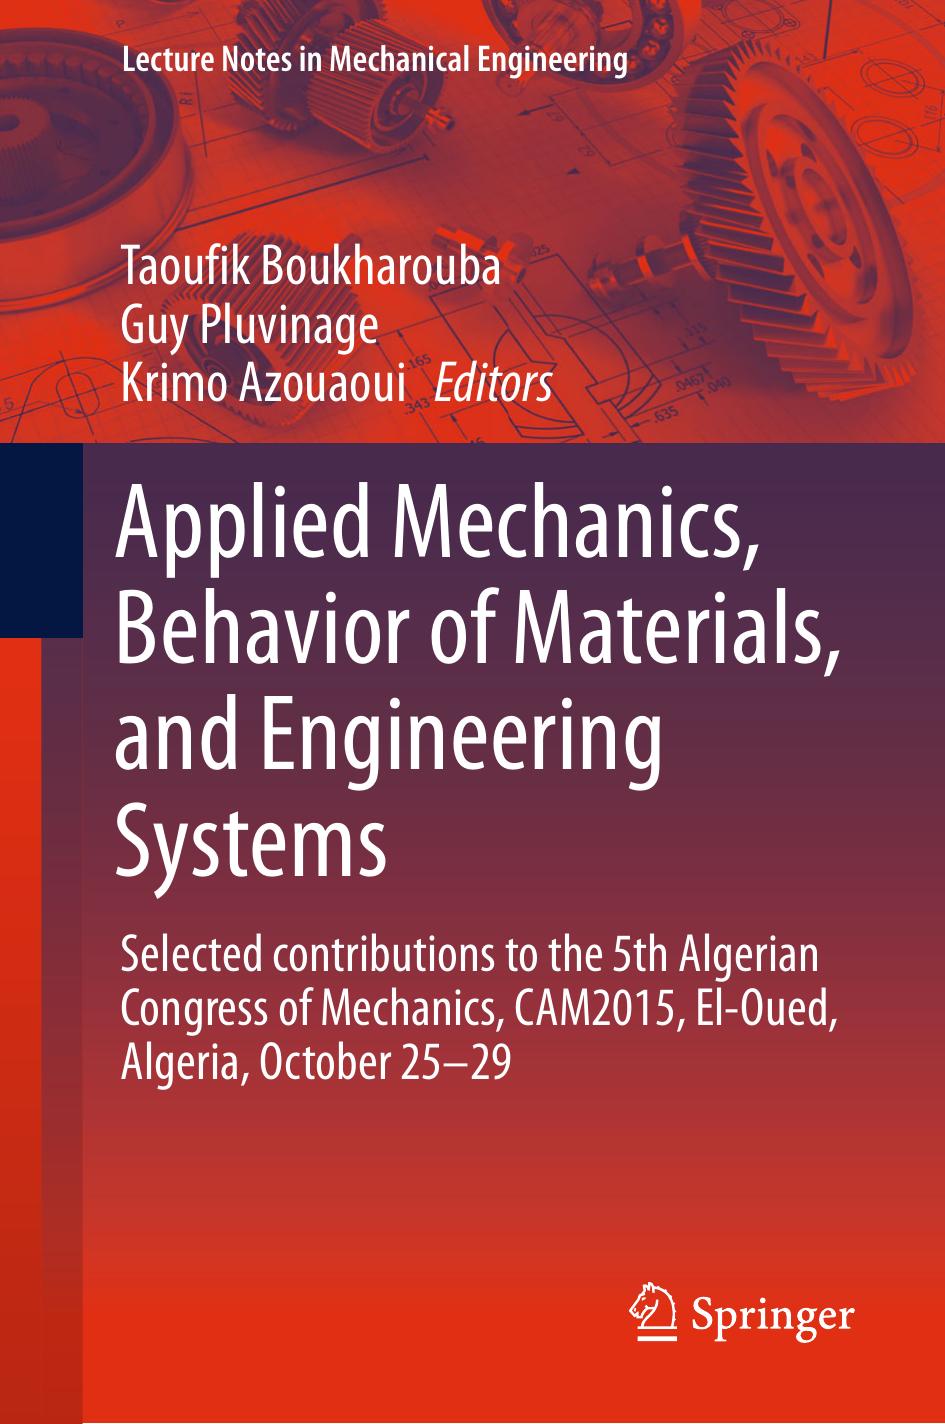 Applied Mechanics, Behavior of Materials, and Engineering Systems, 2017